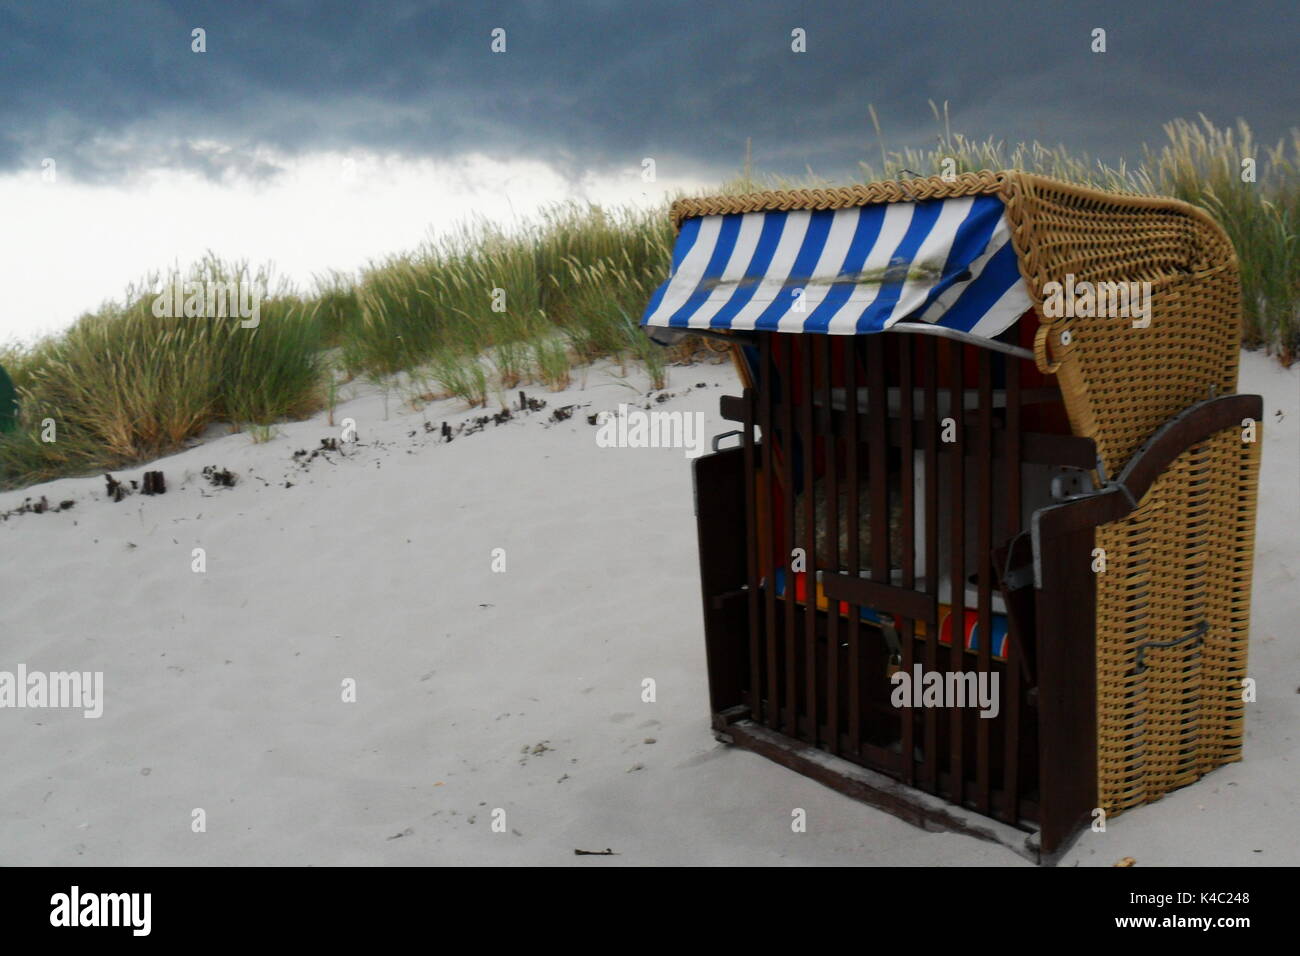 Strandkorb/beach chair on Usedom, Baltic Sea in front of sand dune Stock Photo